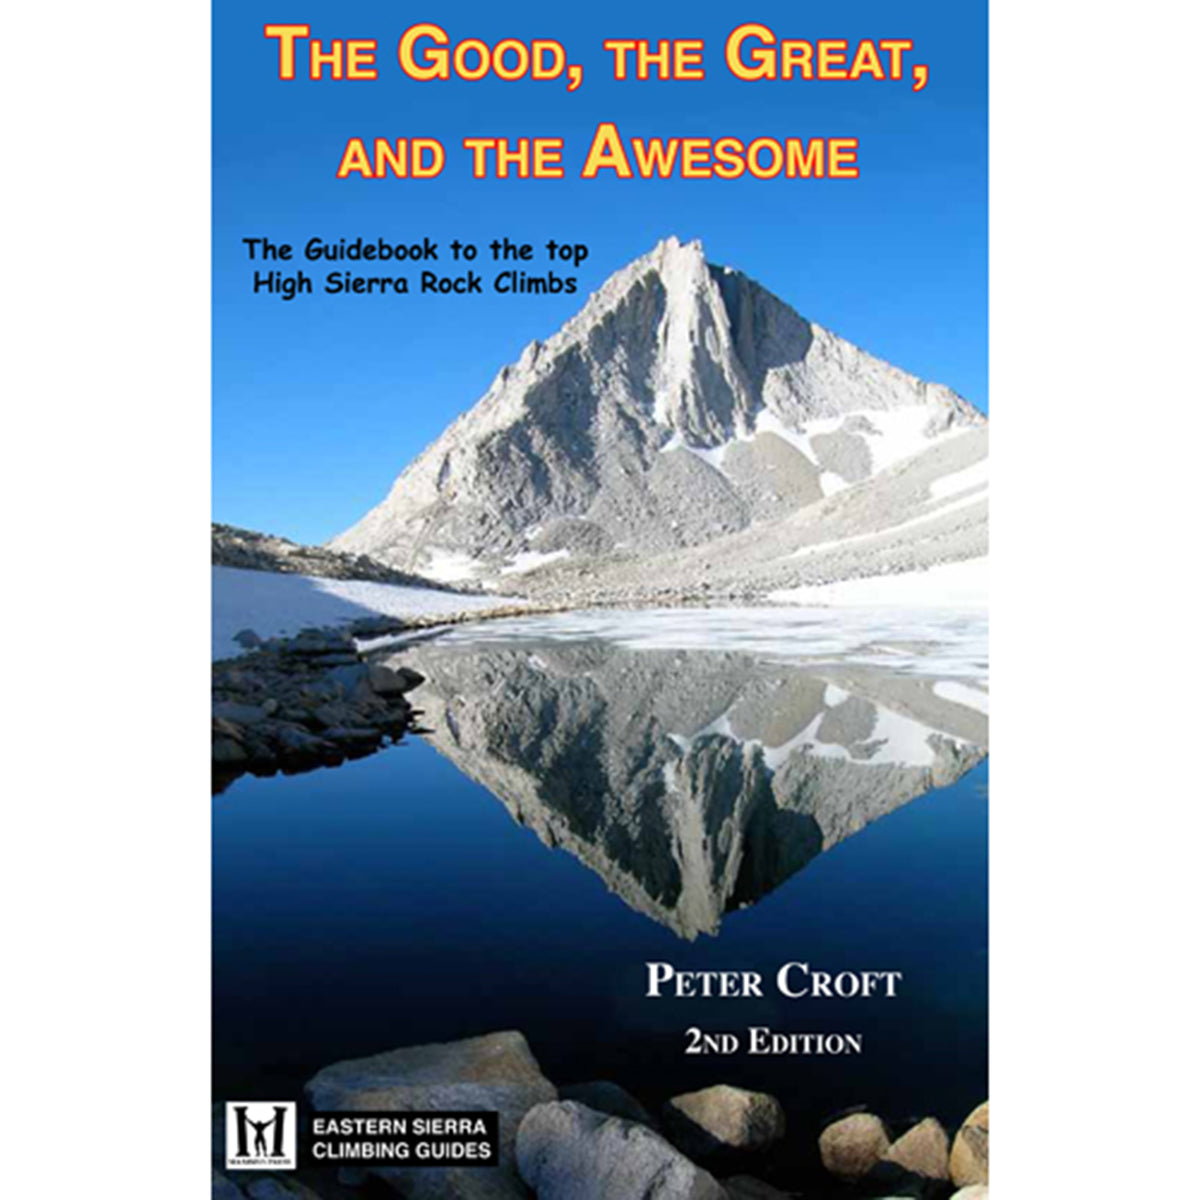 an alpine peak is reflected in a calm lake on the cover of the good the great and the awesome